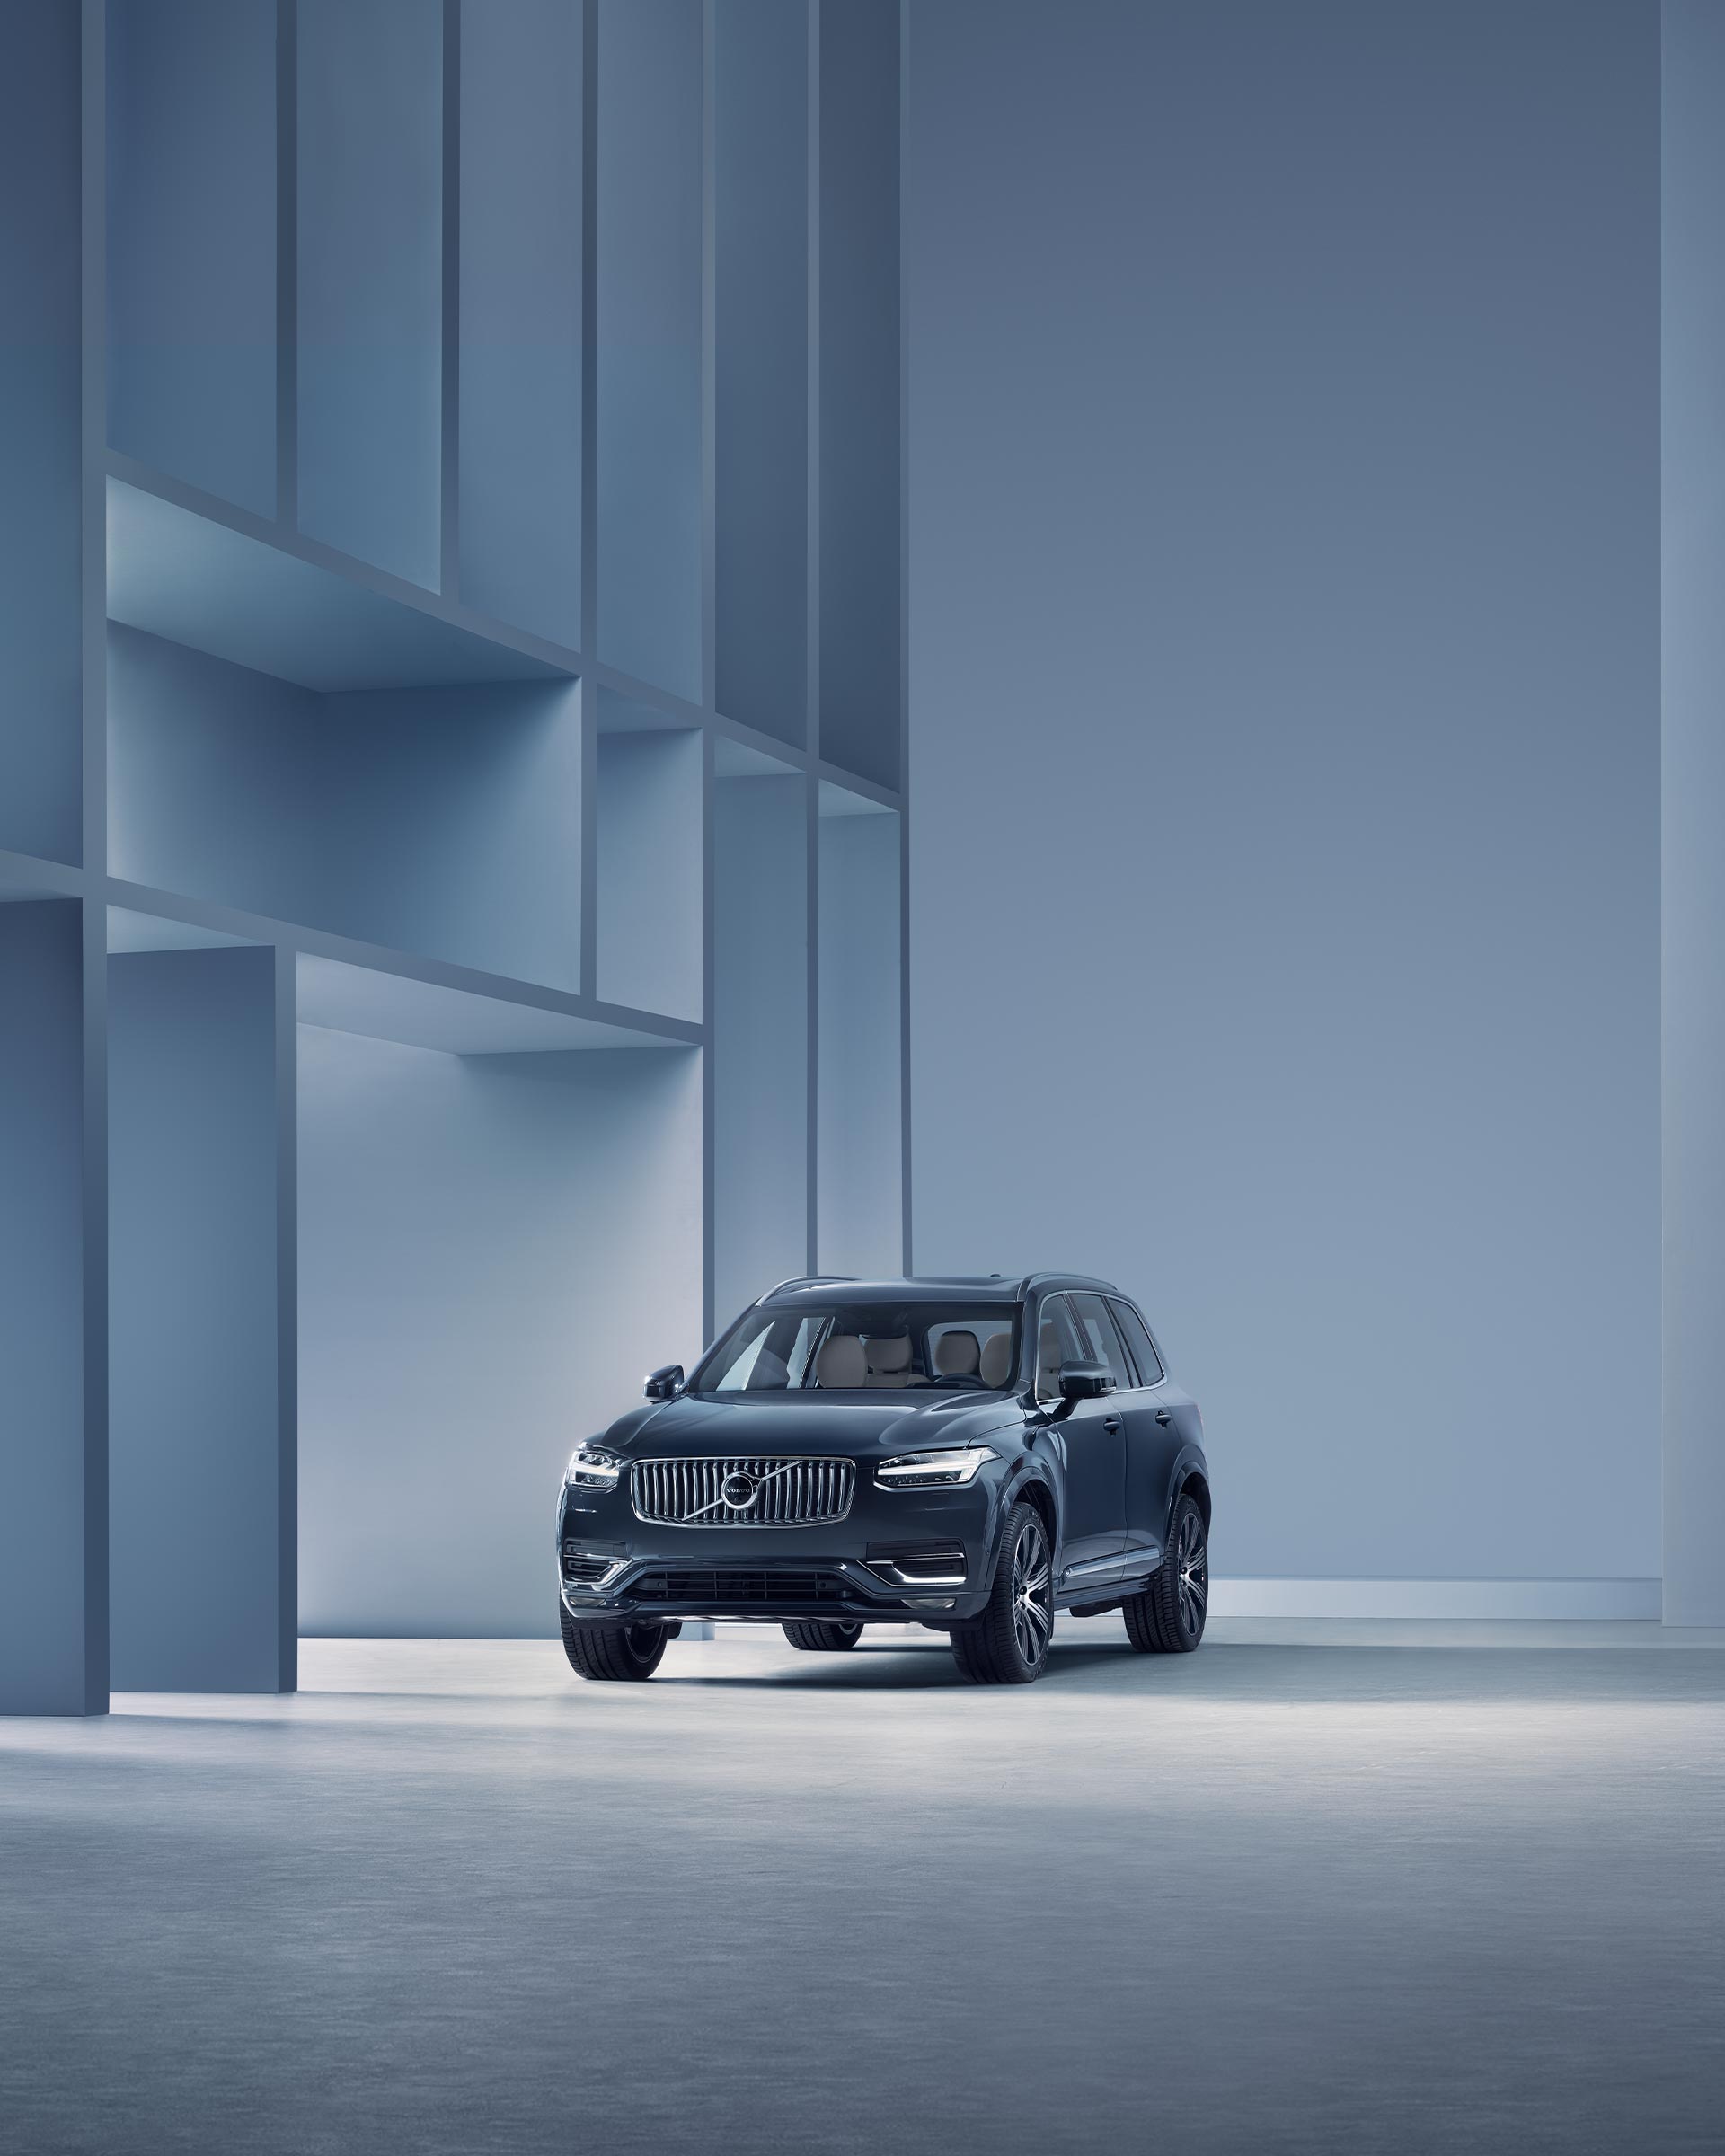 https://www.volvocars.com/images/v/-/media/applications/pdpspecificationpage/my24/xc90-fuel/pdp/xc90-fuel-gallery-6-4x5.jpg?h=2400&iar=0&w=1920